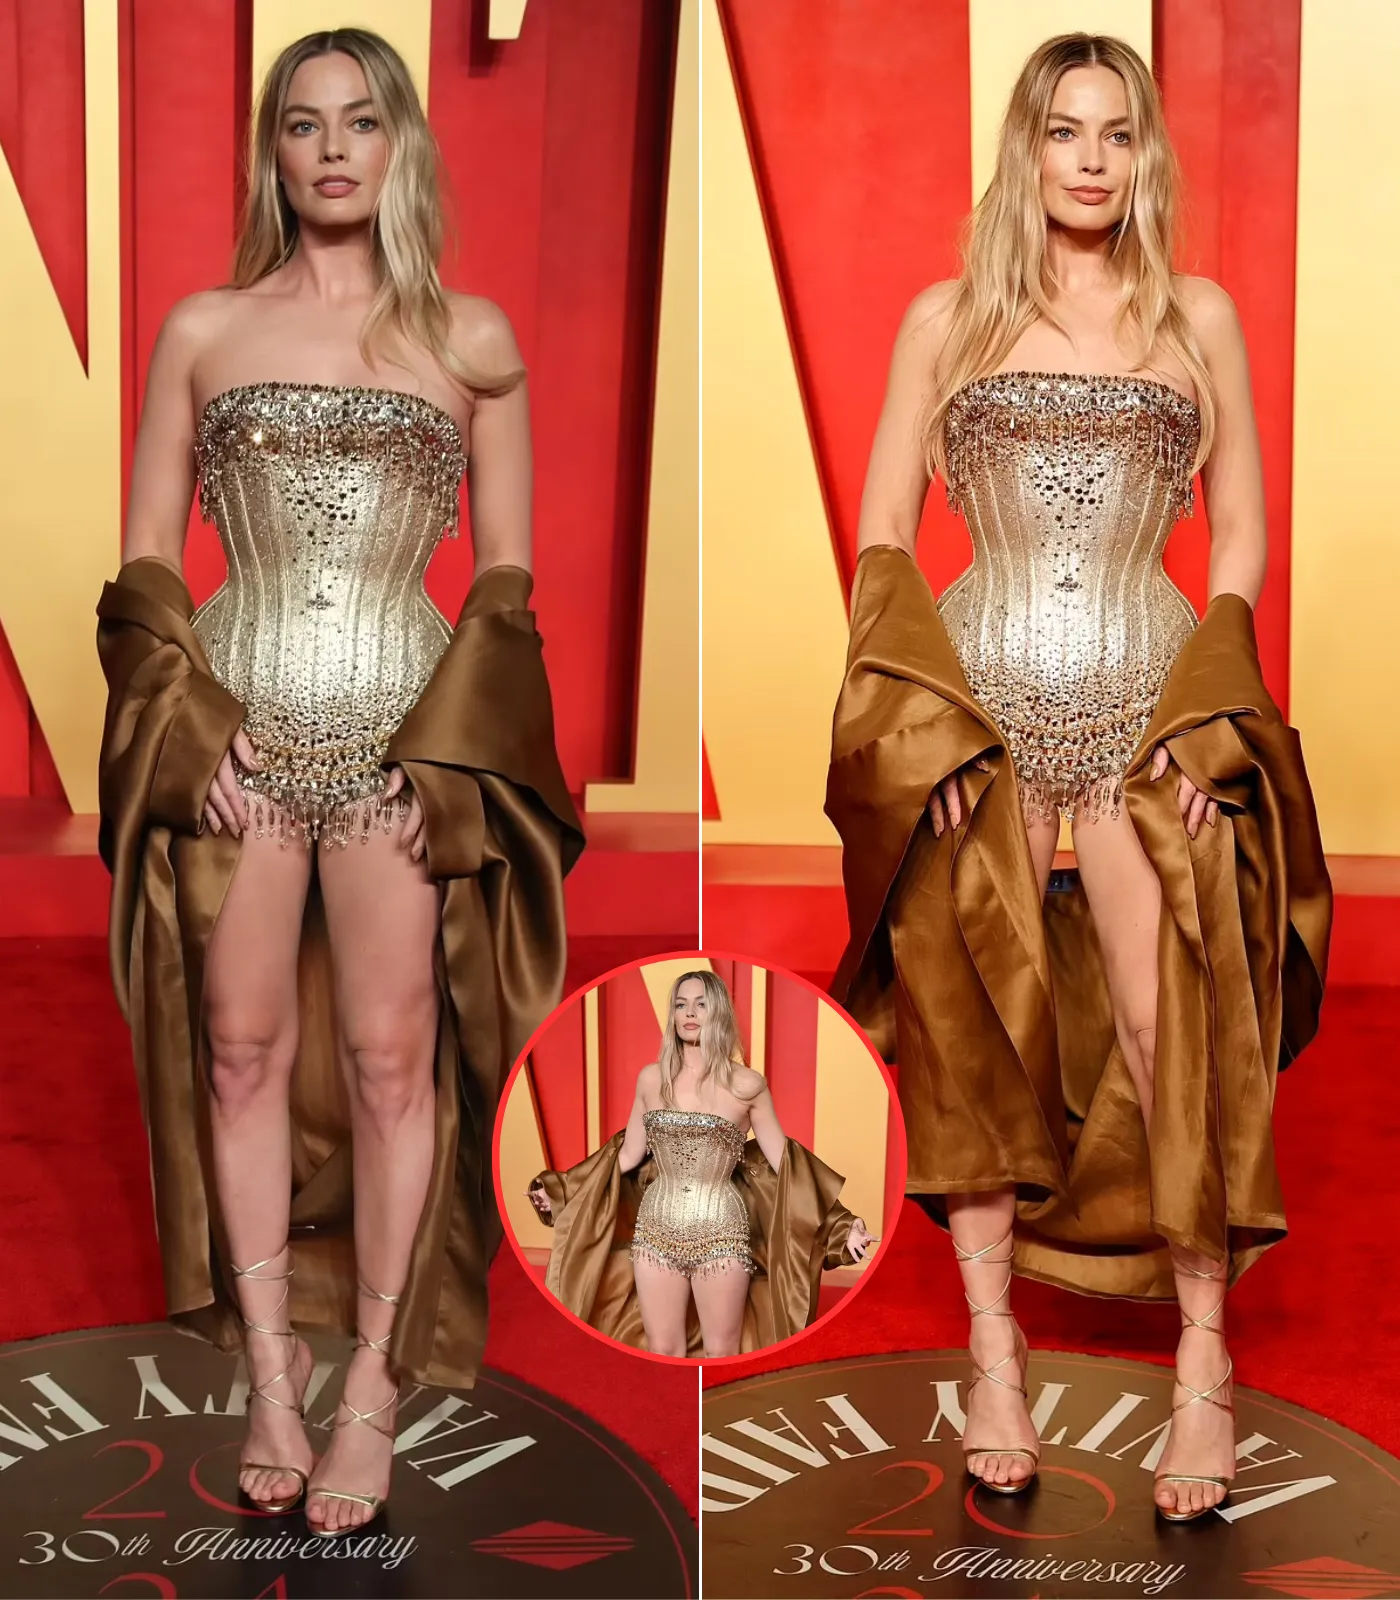 Margot Robbie's Oscar statue look! Barbie star looks uncomfortable as she poses in stiff corset at Vanity Fair Oscar Party